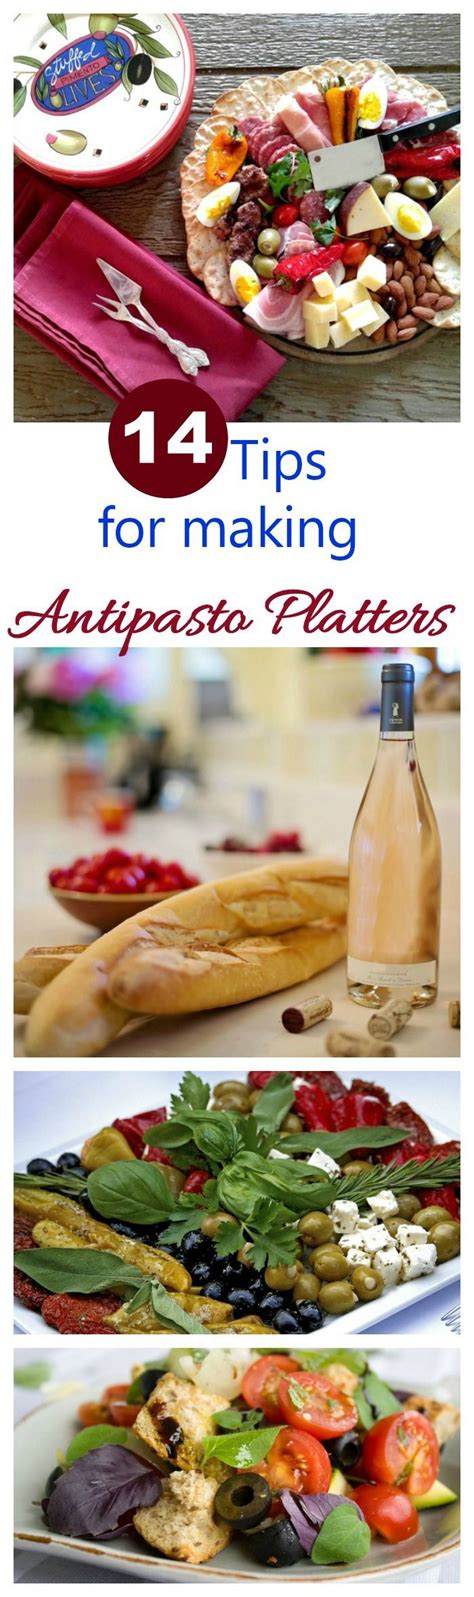 This is a layered antipasto, so you can cut it in square slices neatly and have all the ingredients. Antipasto Platter Tips - 14 Ideas for the Perfect ...